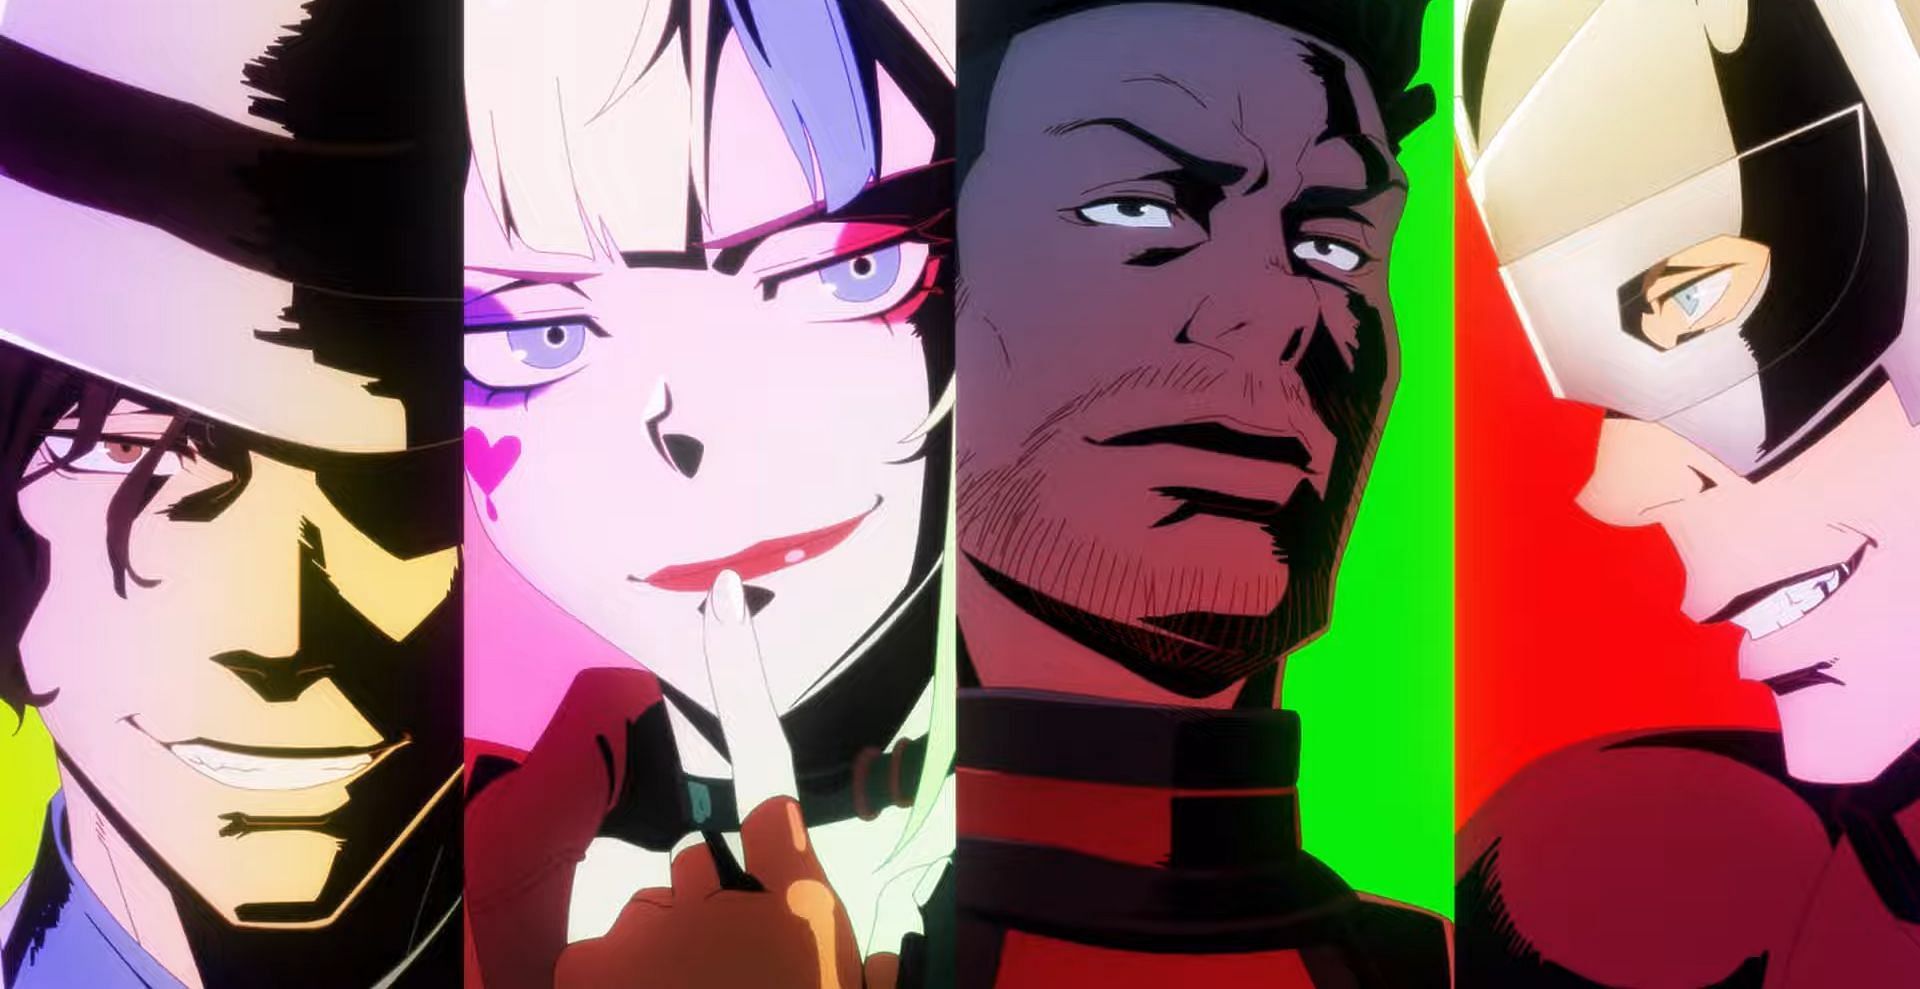 Clayface, Harley Quinn, Deadshot, and Peacemaker as seen in the Suicide Squad ISEKAI anime (Image via WIT Studio)